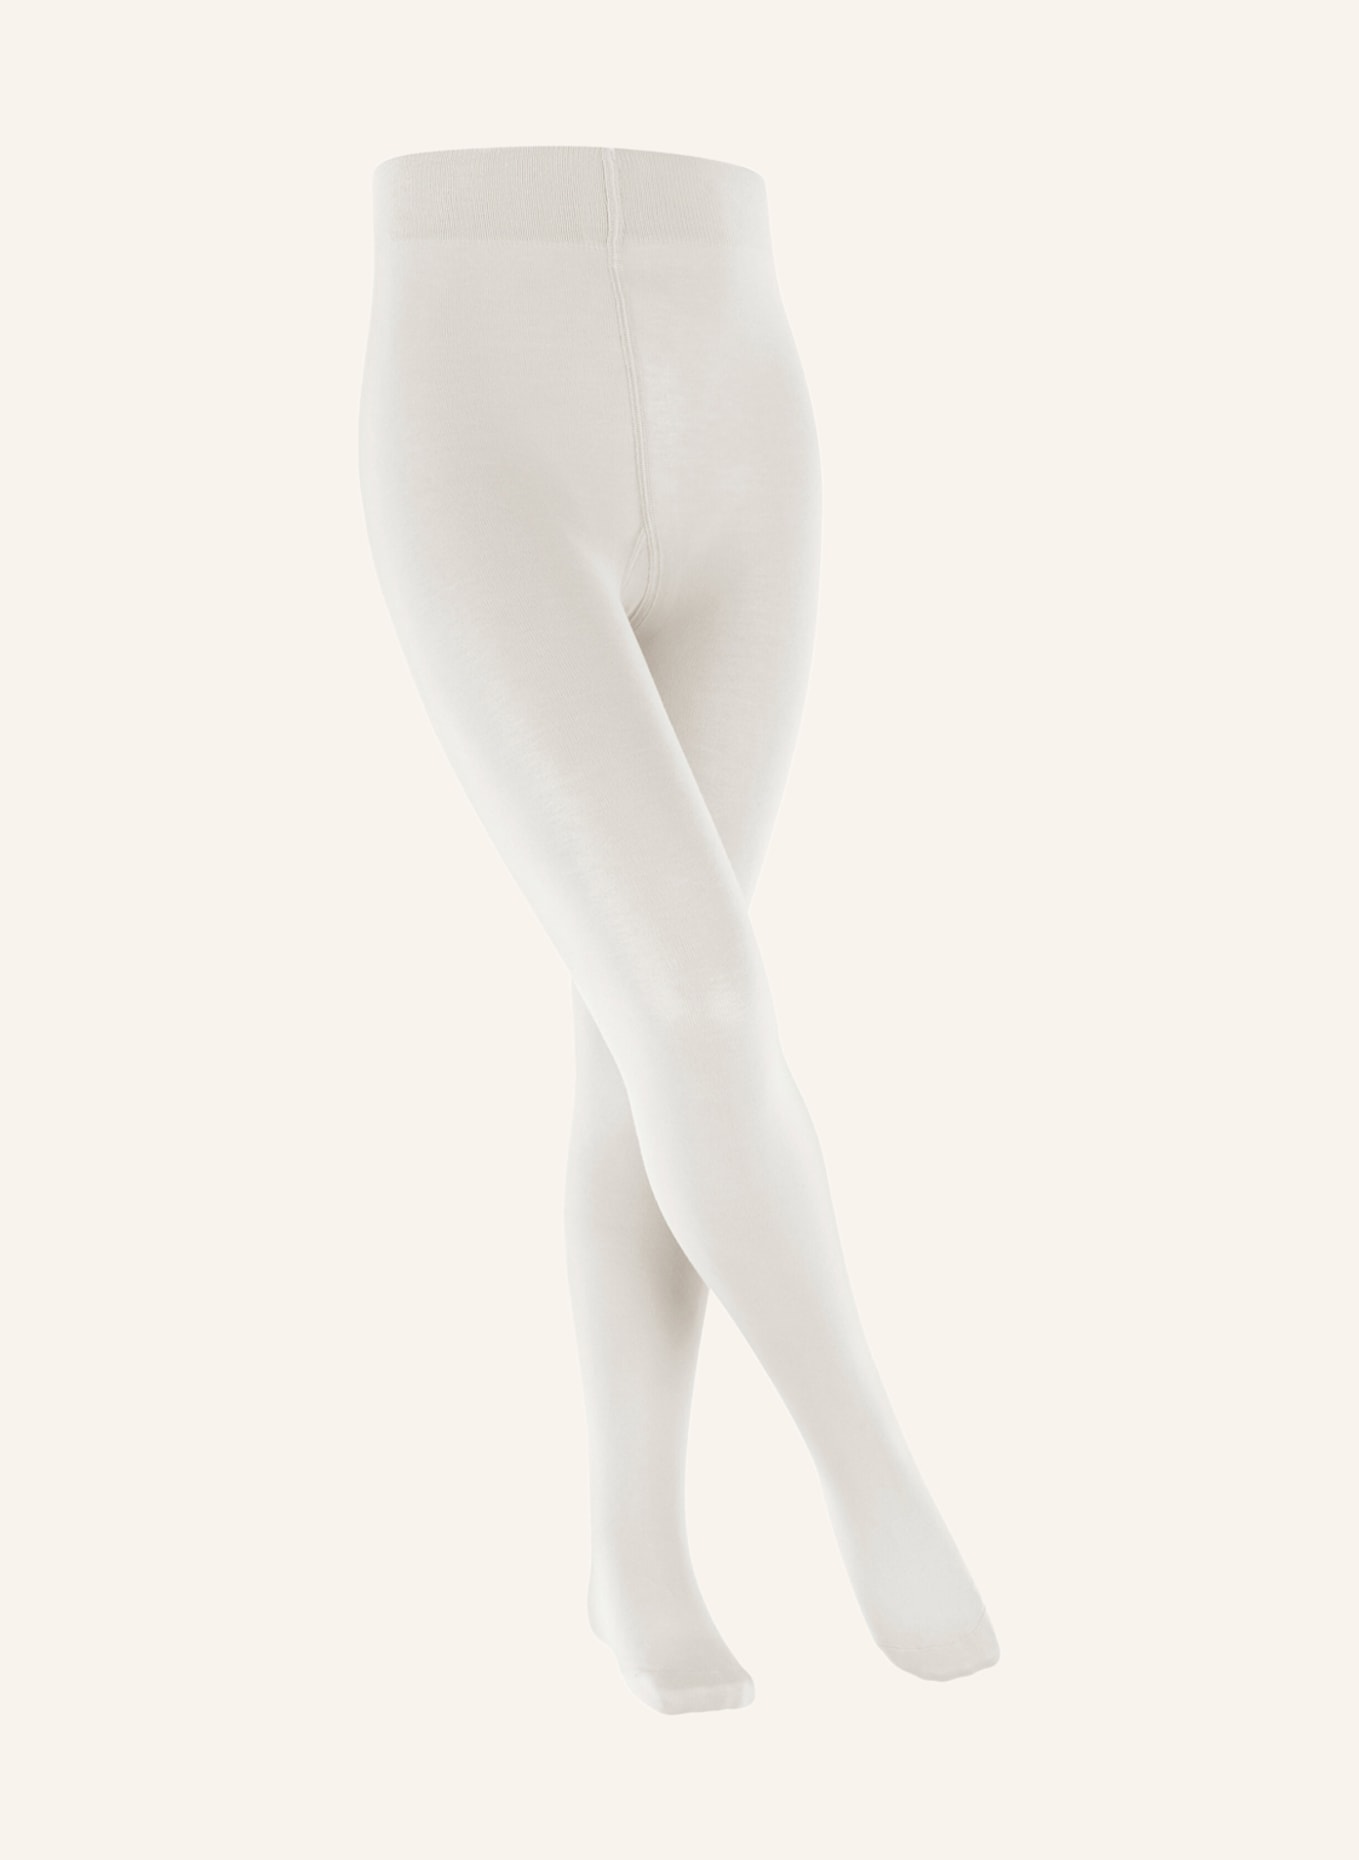 FALKE Pantyhose COTTON TOUCH, Color: 2040 off-white (Image 1)